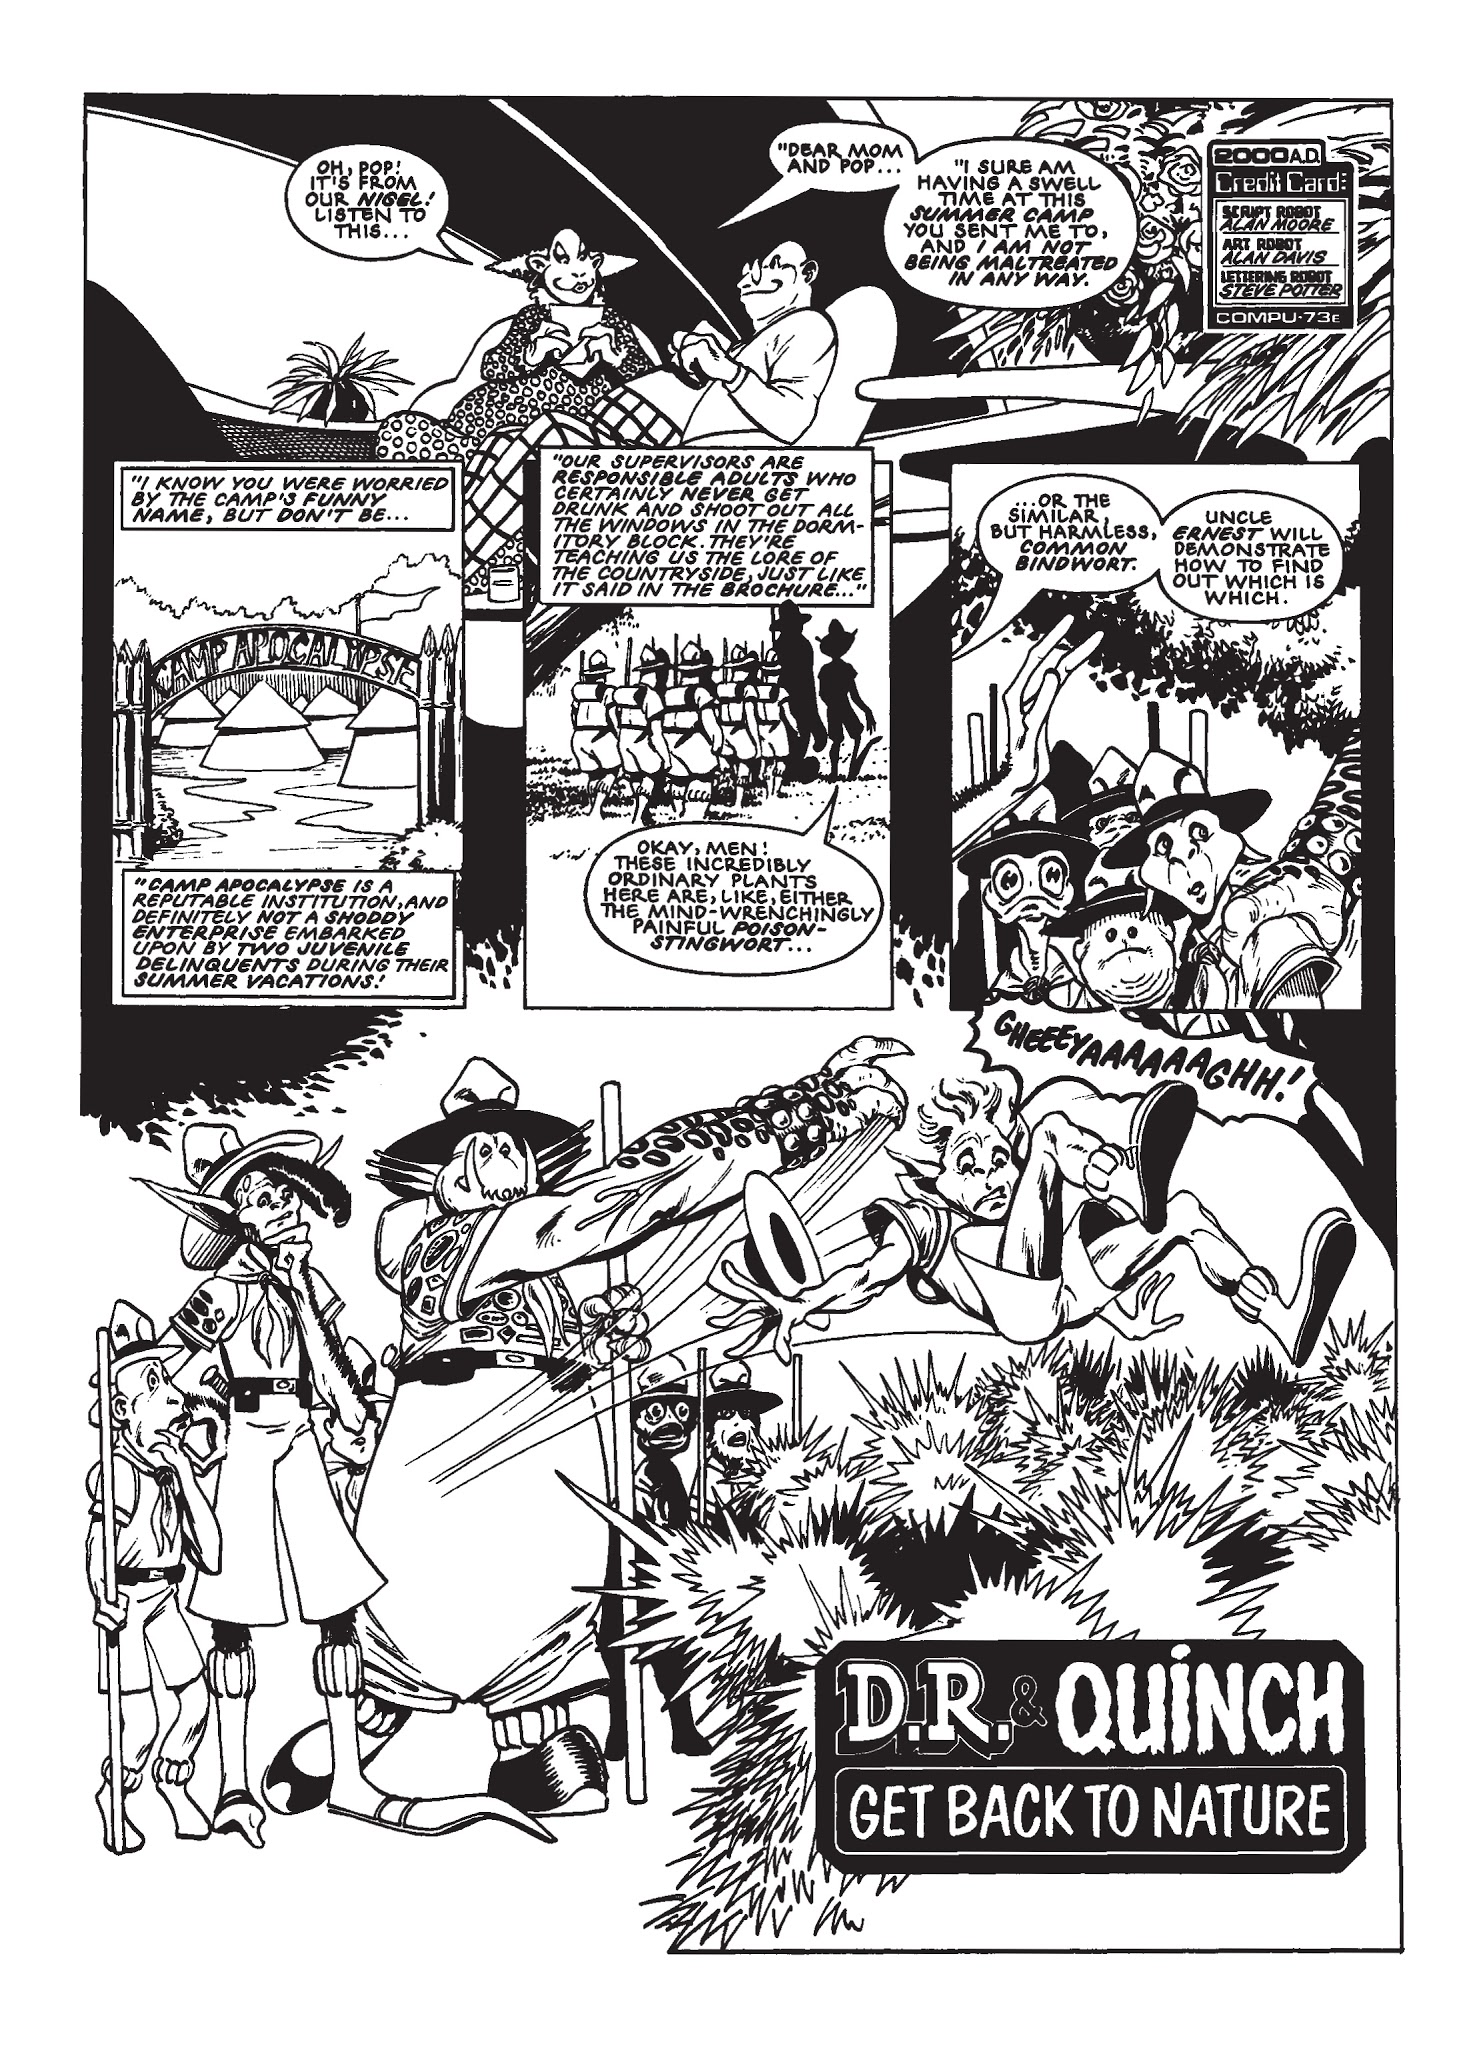 Read online The Complete D.R. & Quinch comic -  Issue # TPB - 93